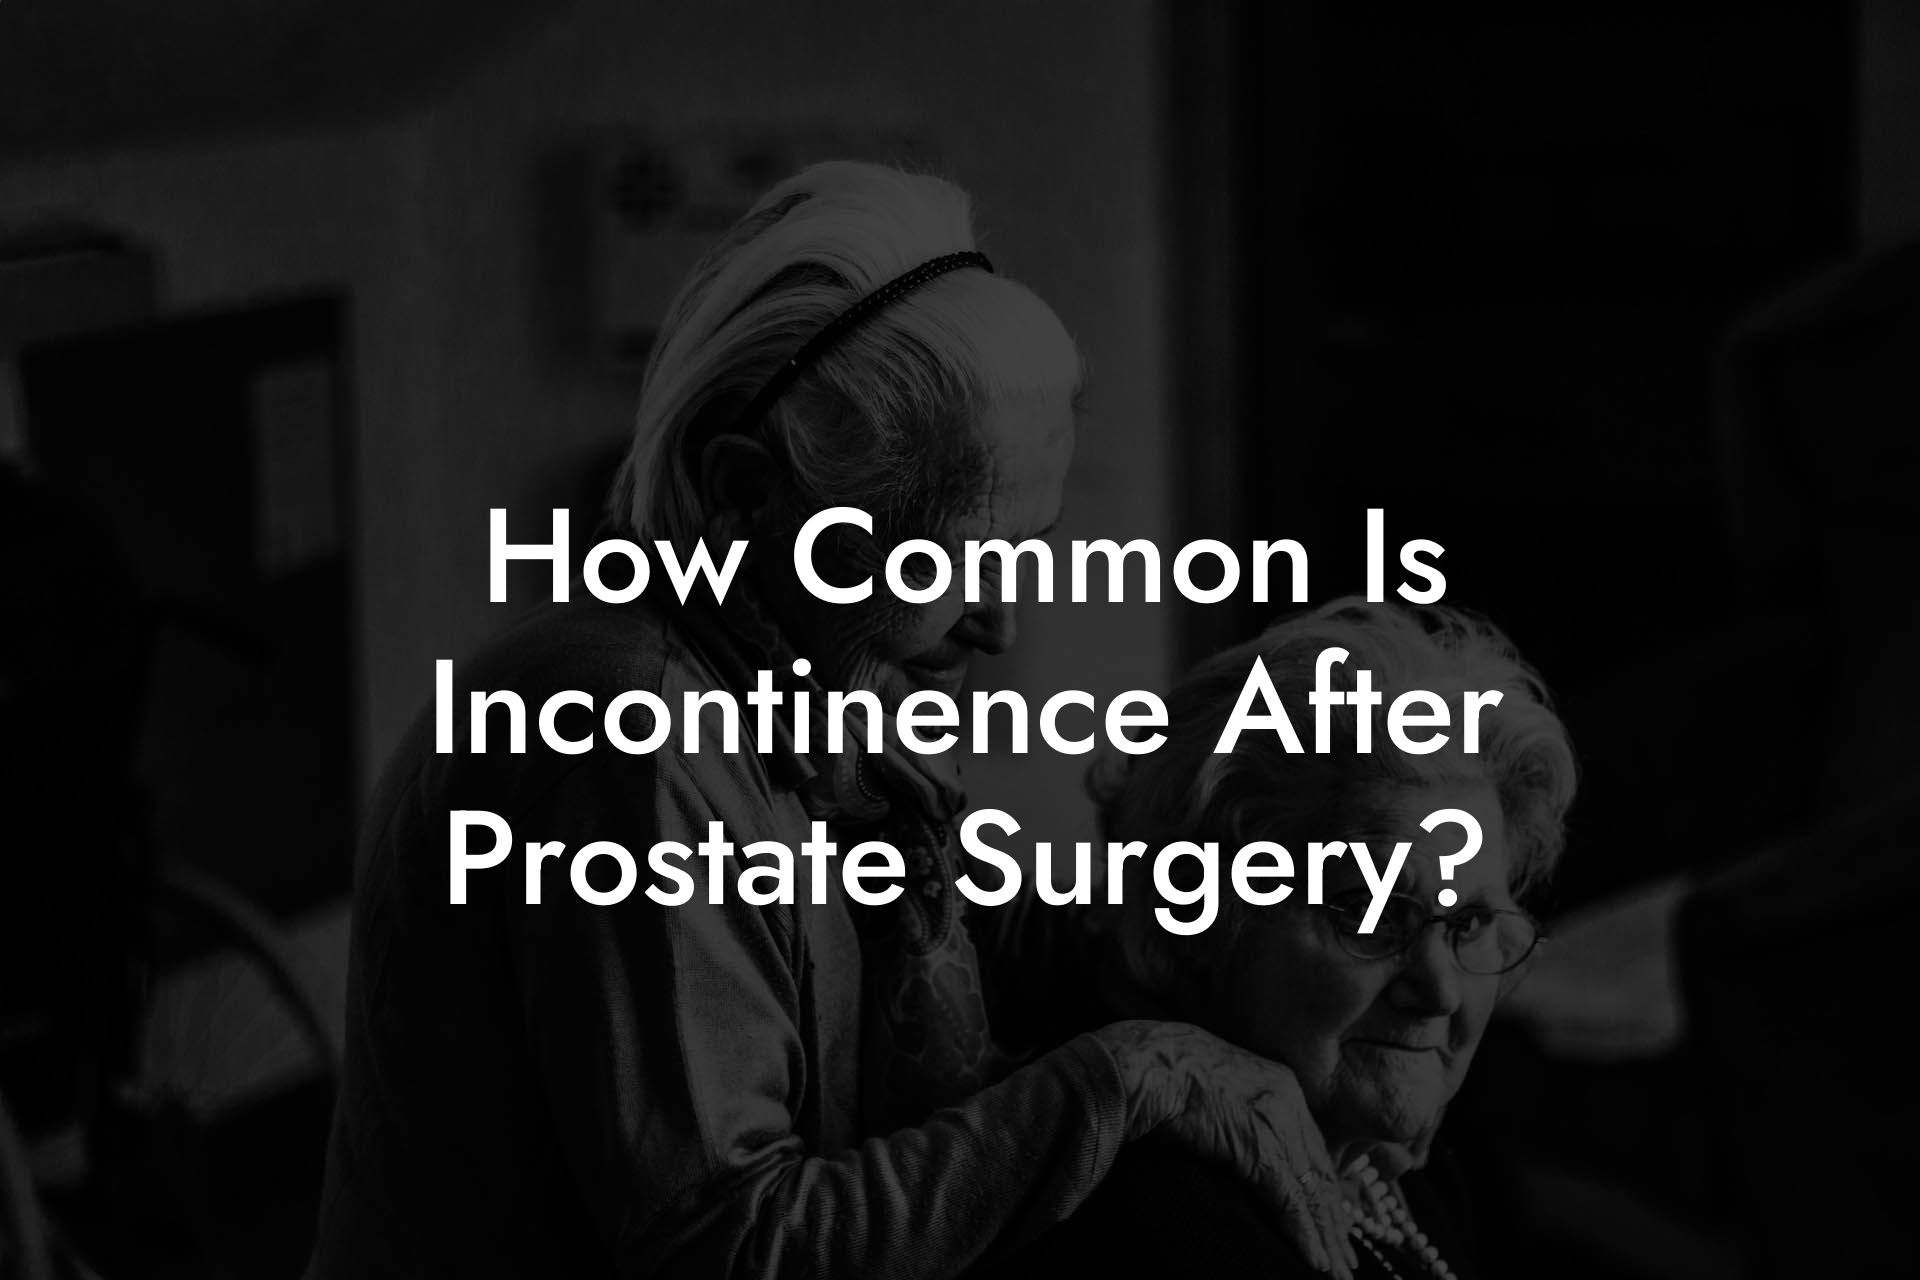 How Common Is Incontinence After Prostate Surgery?